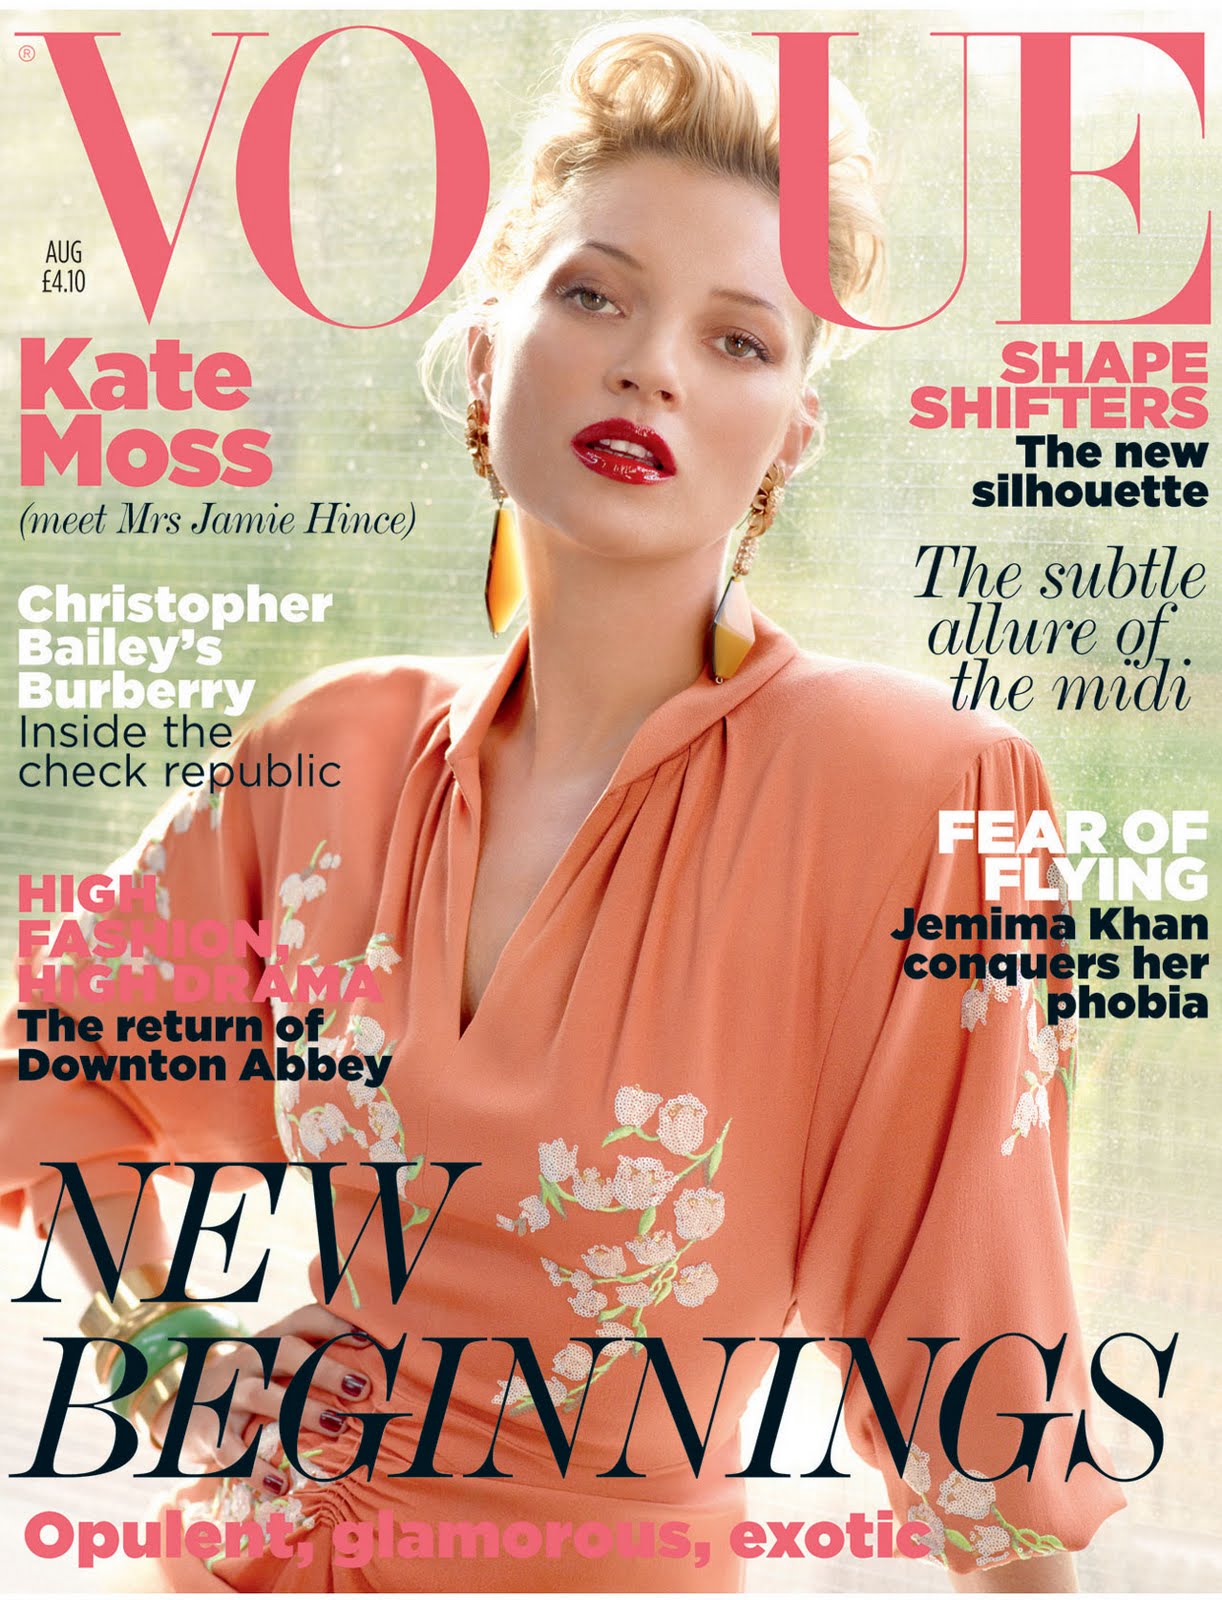 Kate Moss covers Vogue UK August 2011 by Mario Testino